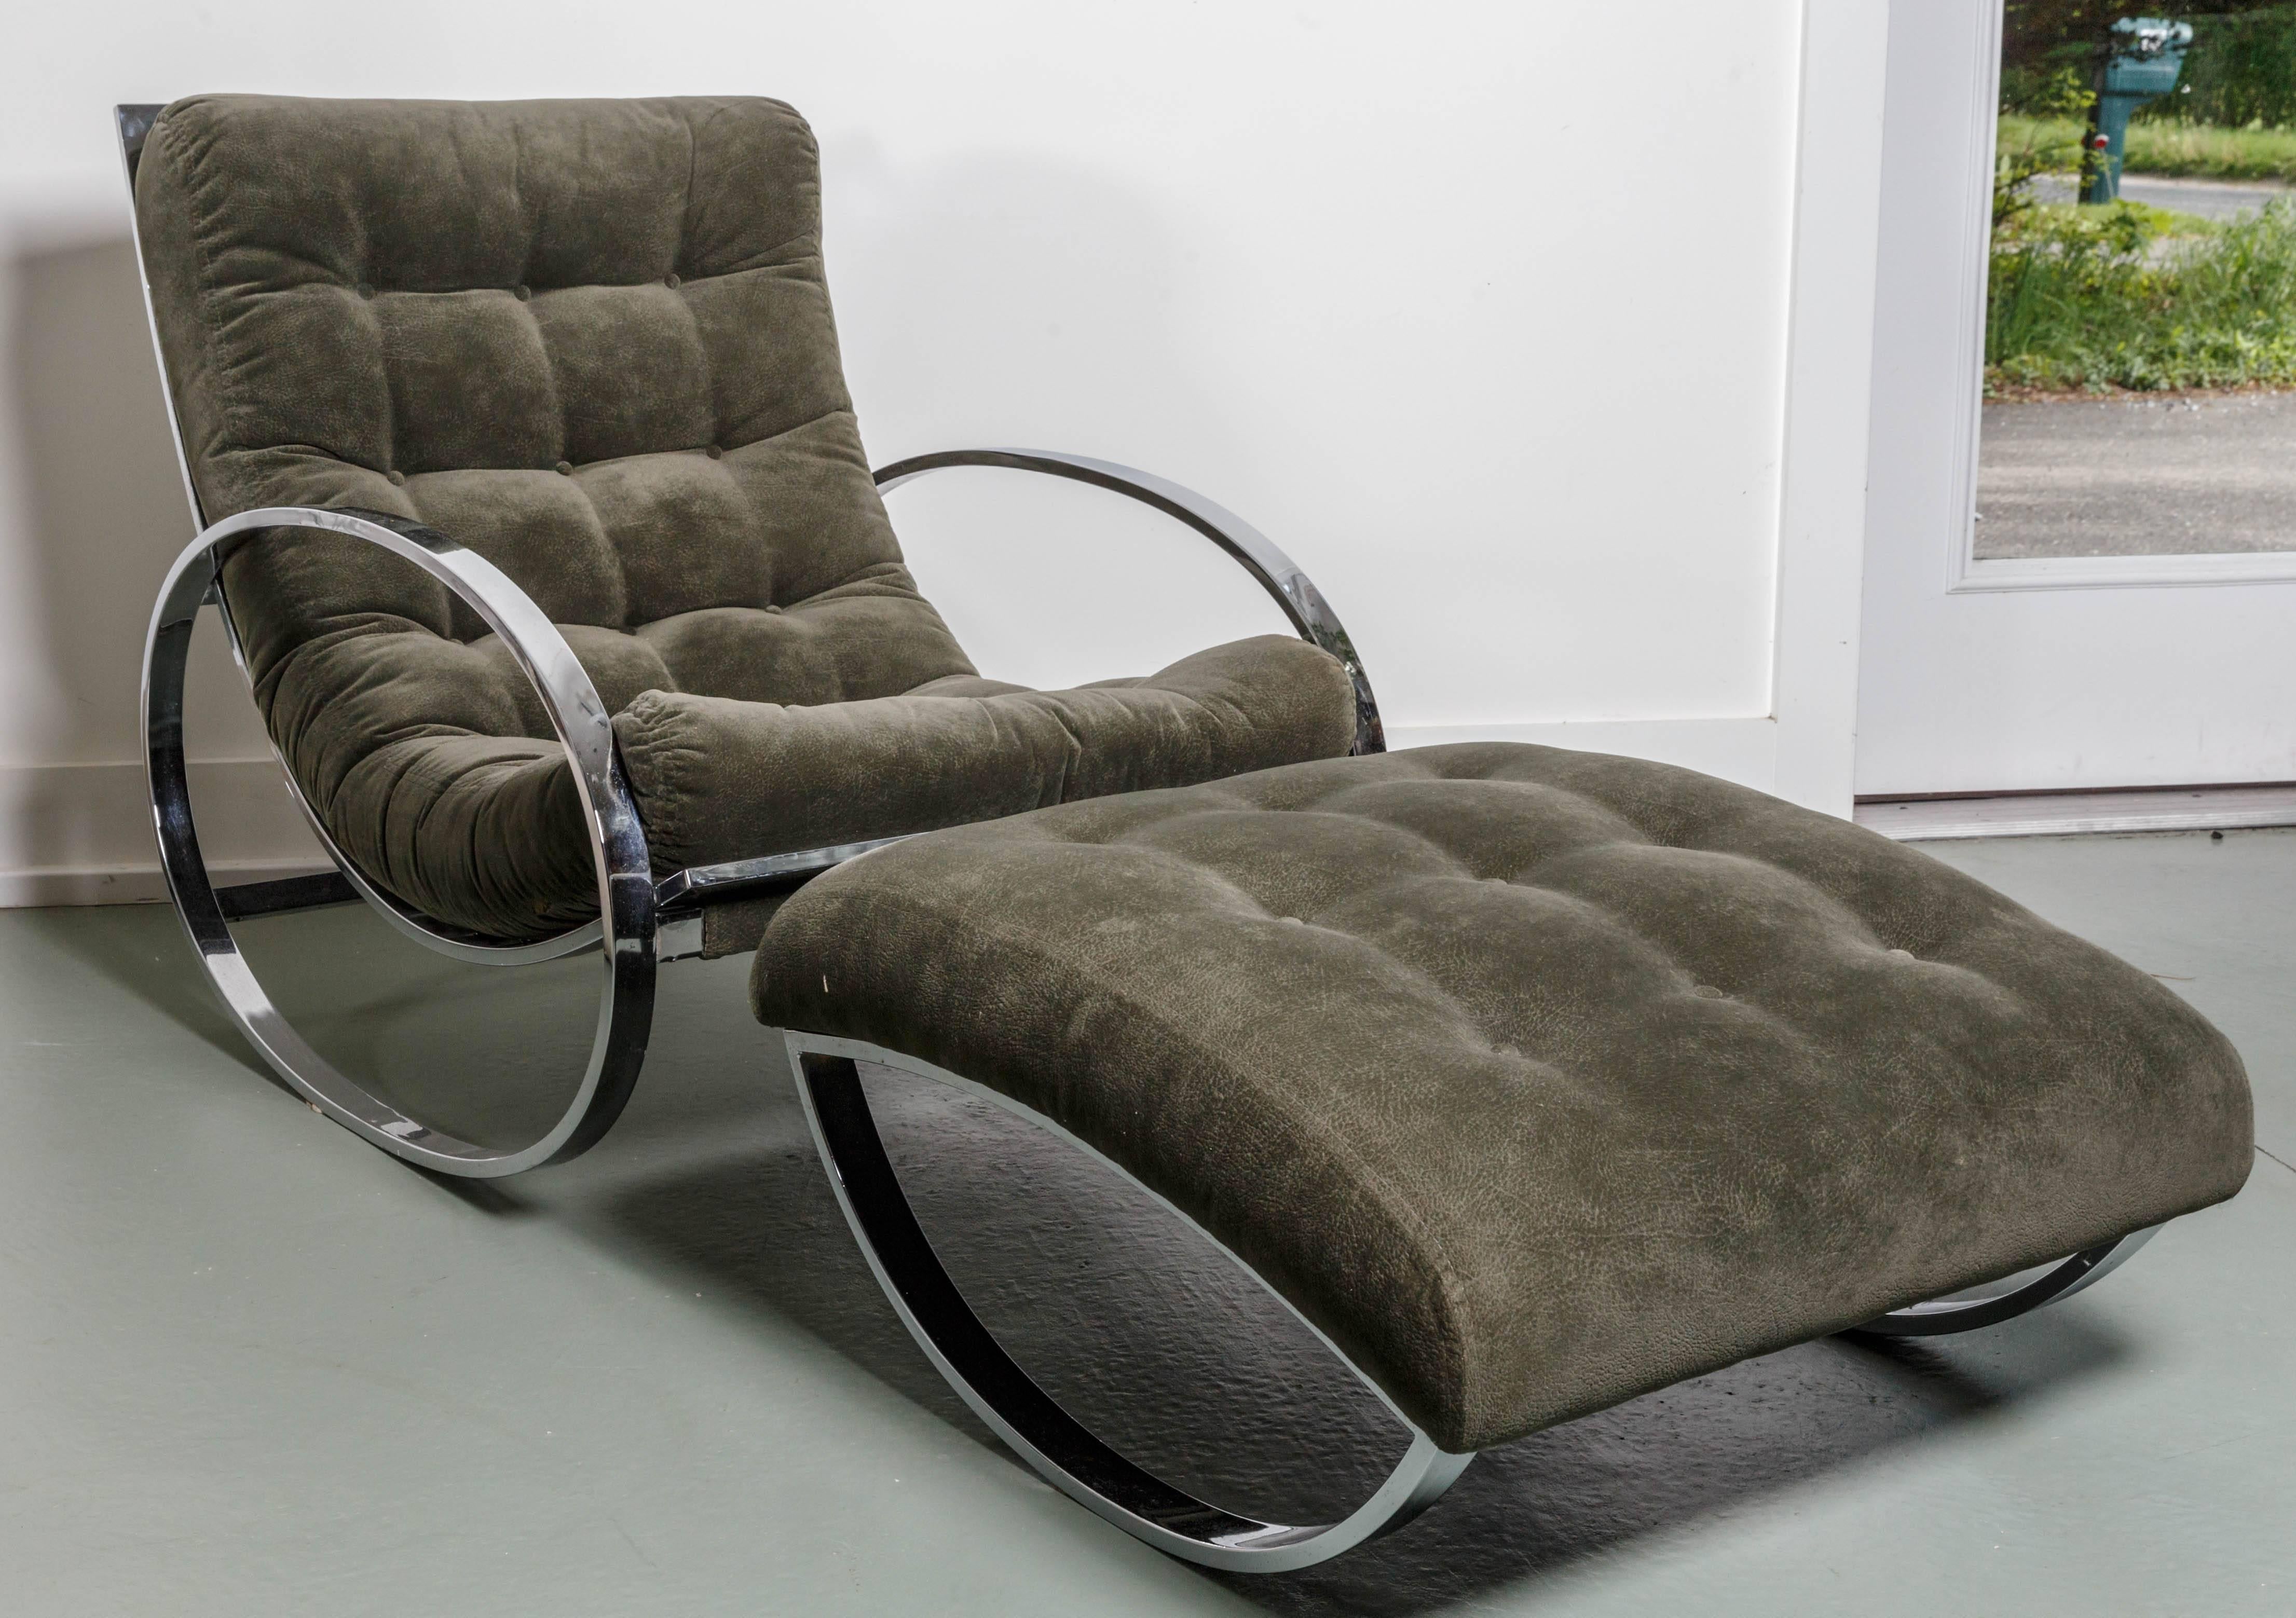 Renato Zevi Ellipse Rocking Chair and Ottoman, in the style of Milo Baughm 2